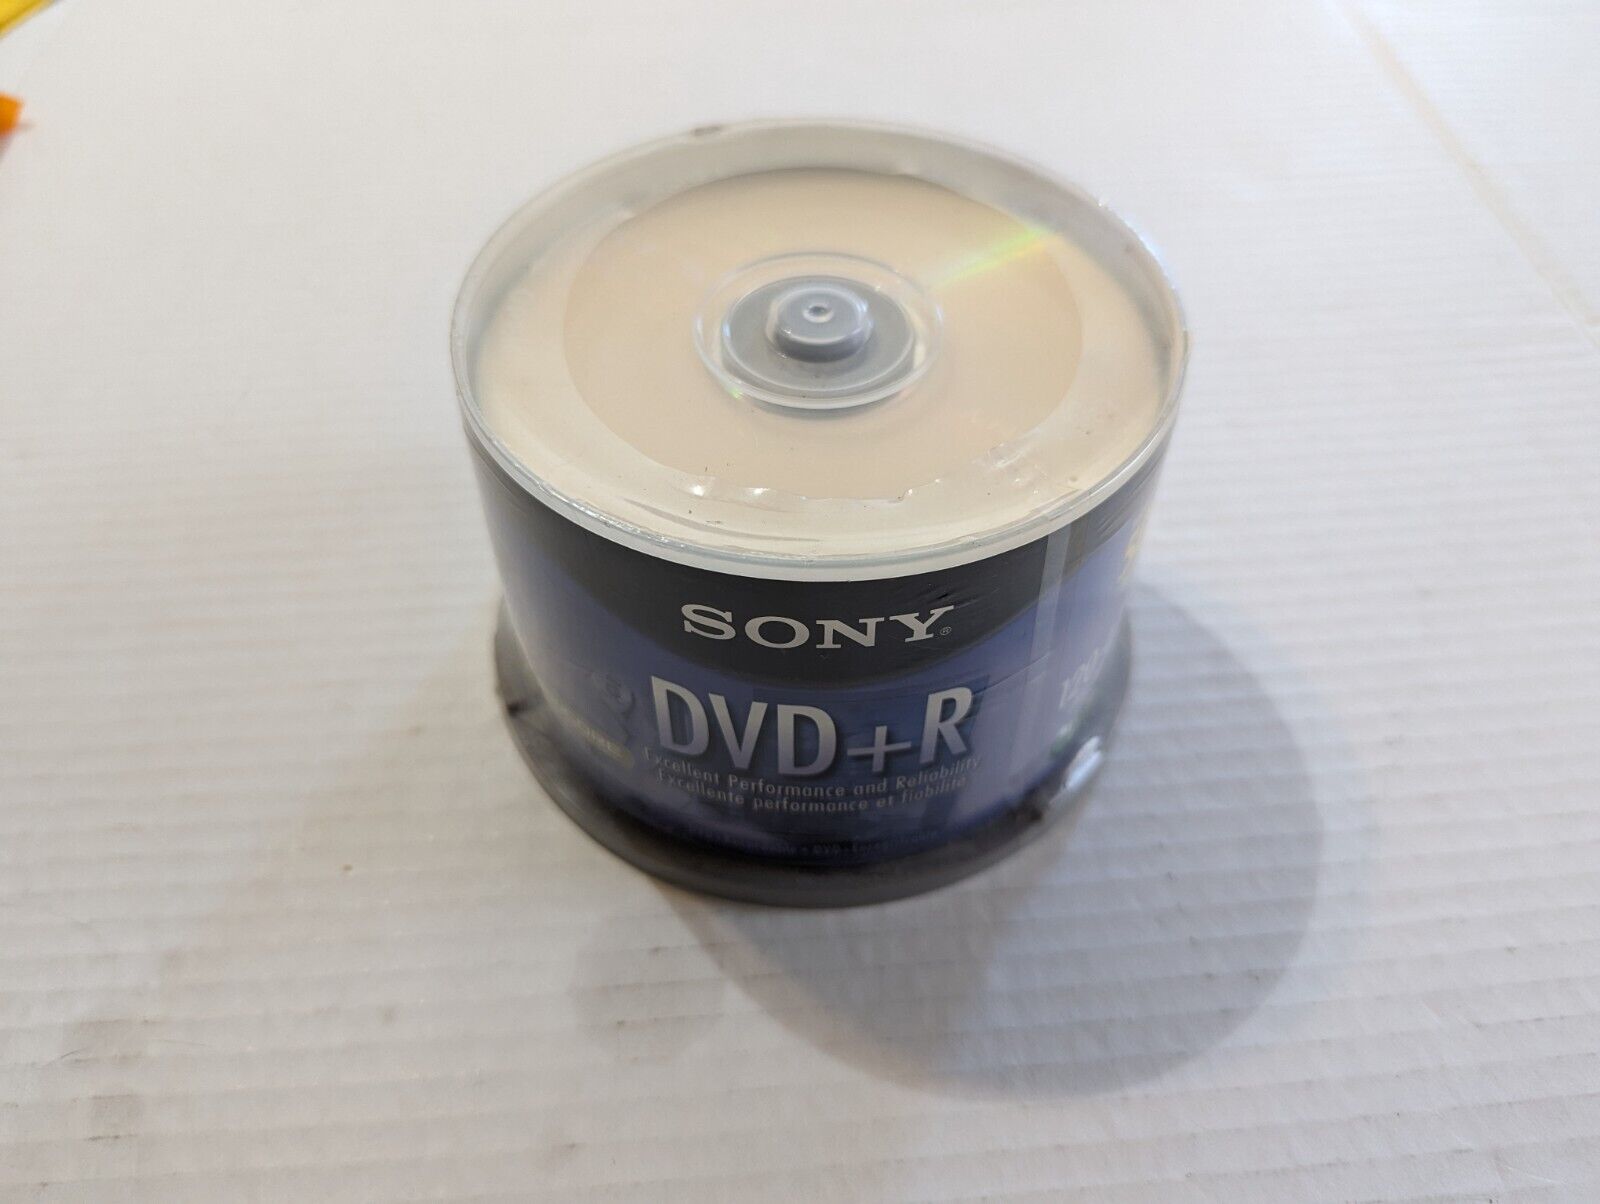 Sony DVD+R SEALED 50-Pack Blank Media 4.7GB -120 min 16x Accucore